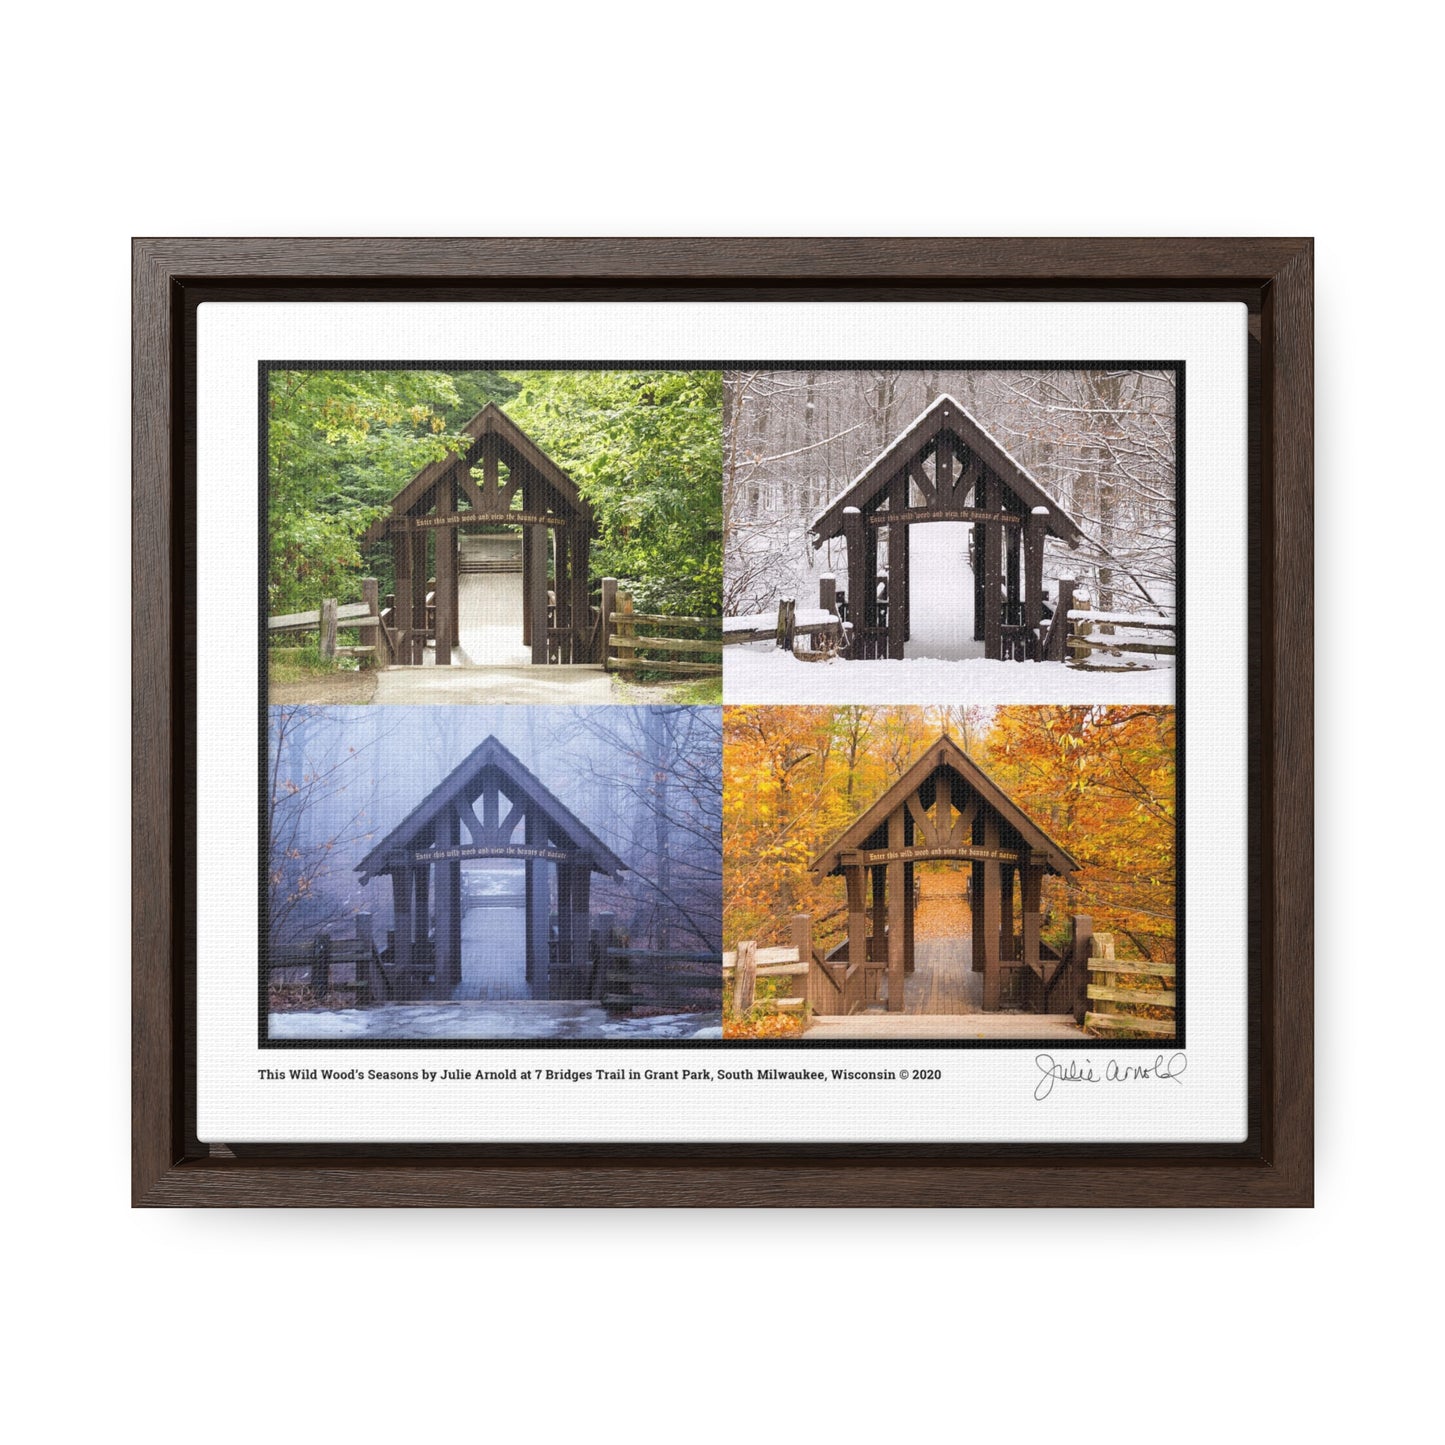 7 Bridges Trail’s Covered Bridge at Grant Park in South Milwaukee Wisconsin, All 4 Seasons Photo Collage, Framed Canvas Wrap Wall Art